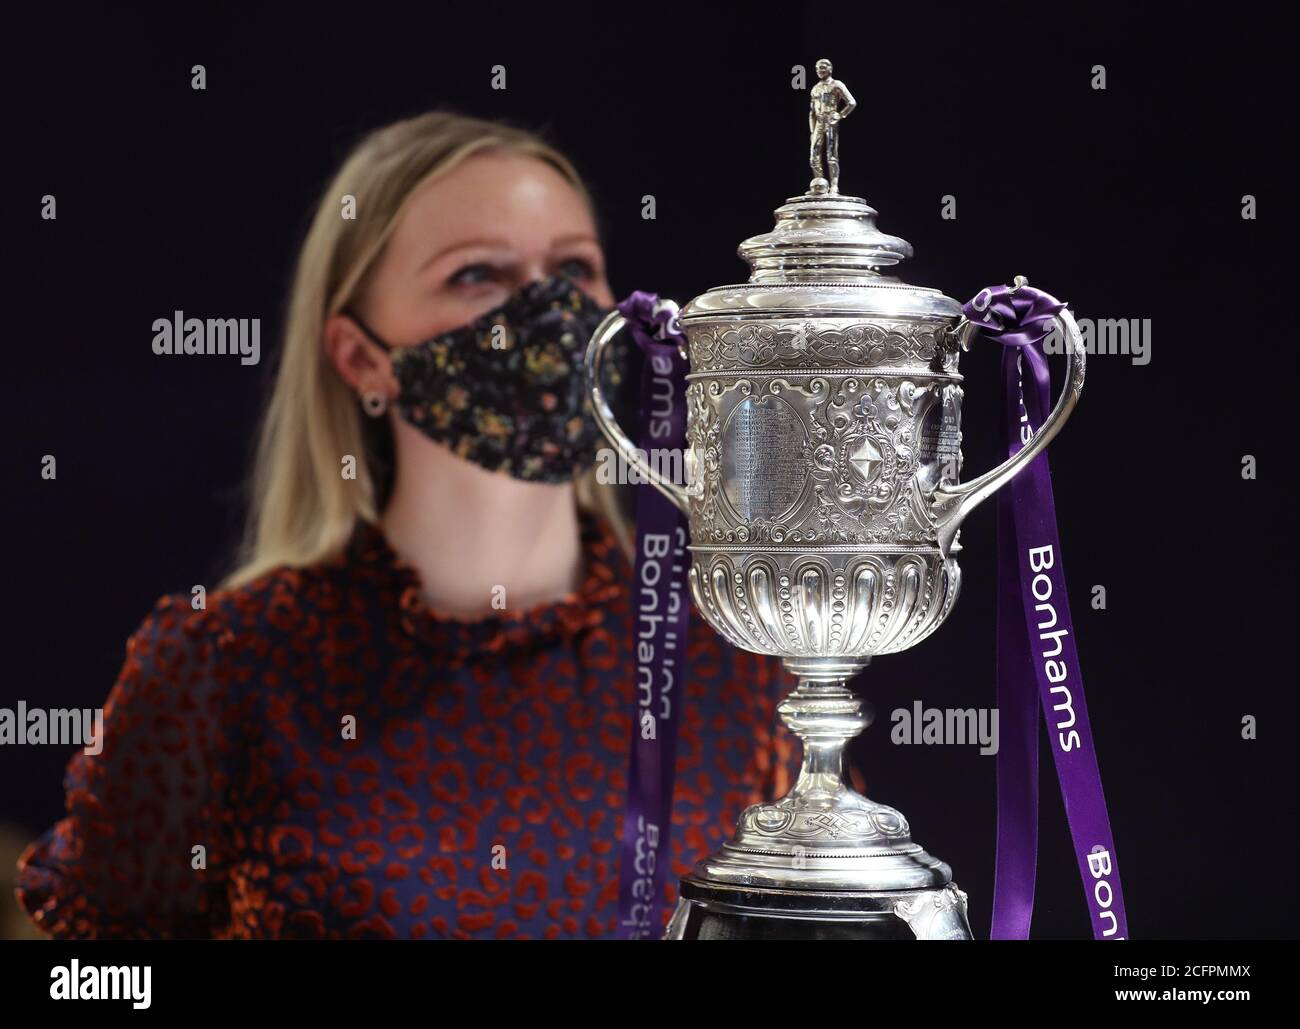 Laurel Kemp of Bonhams with the oldest surviving FA Cup trophy during a preview of the sporting Trophies Sale at which will take place as Bonhams New Bond Street saleroom on September 29. The silver two-handled cup, estimated at GBP 700,000 -900,000, was made by Vaughton and Sons of Birmingham in 1896, and was presented to the FA Cup winning teams between 1896 and 1910, including Manchester United, Manchester City, Everton, Newcastle United and Tottenham Hotspur. Stock Photo